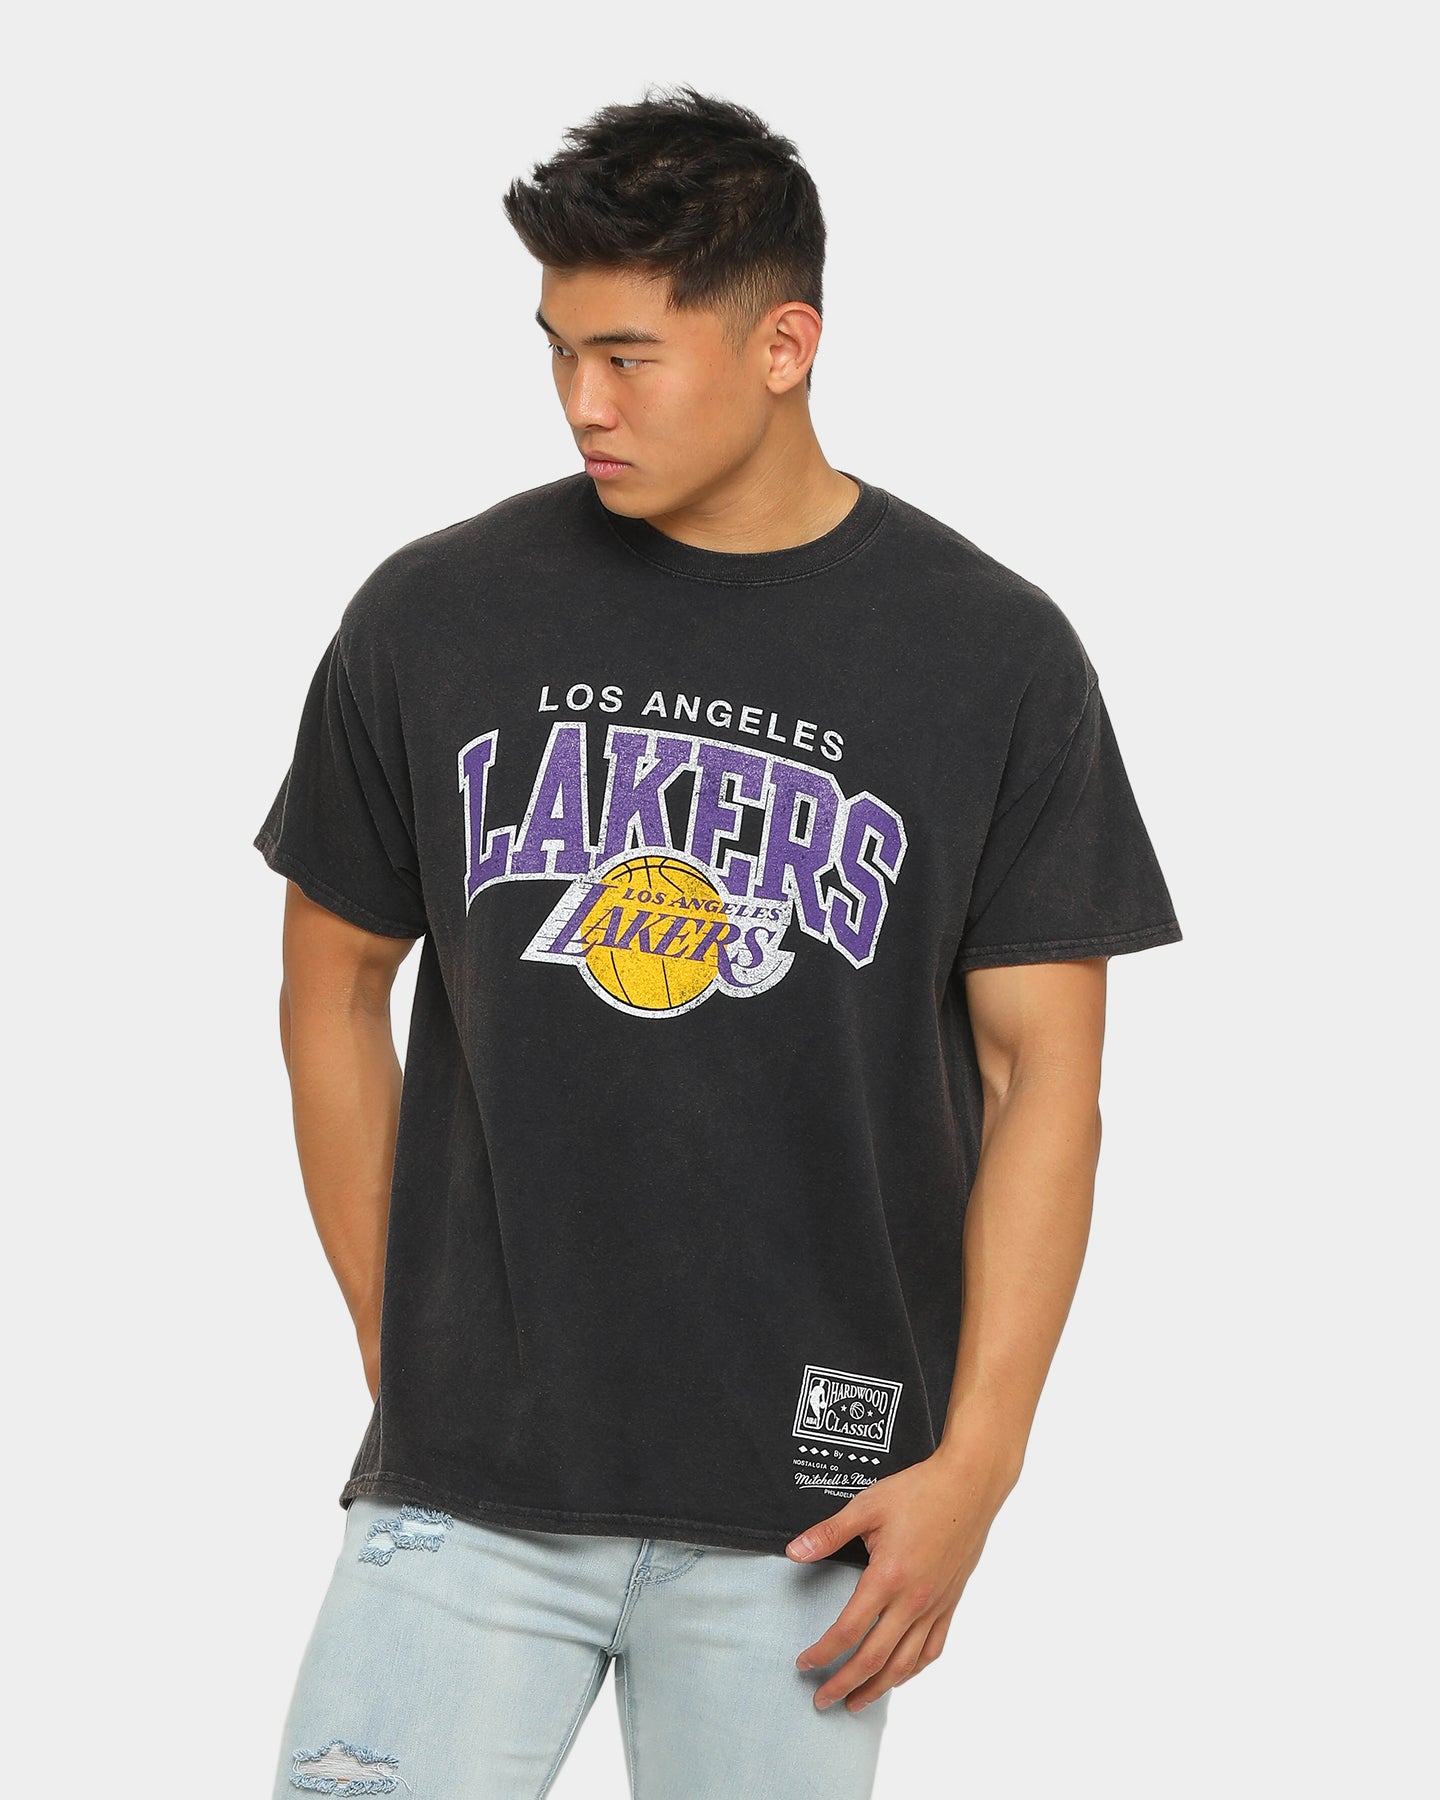 lakers shirt mitchell and ness